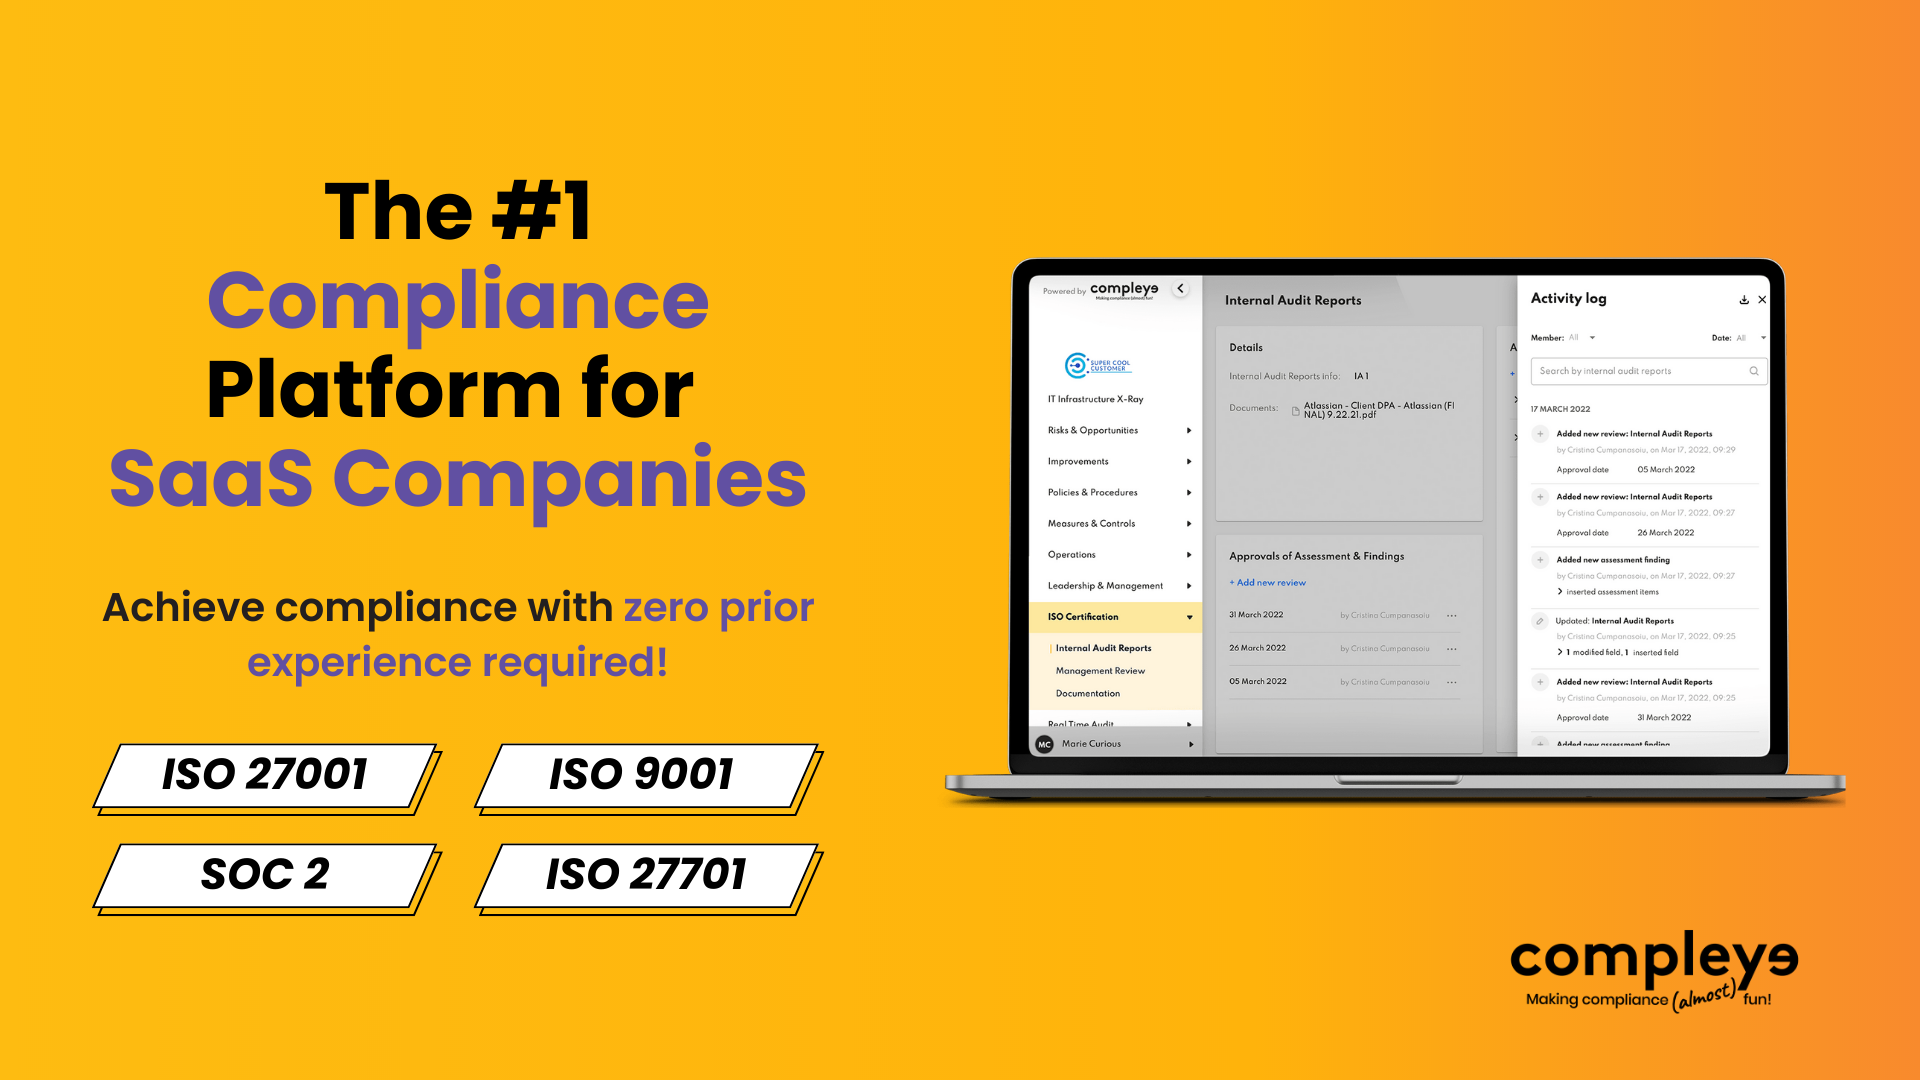 startuptile Compleye Online-We make compliance (almost) fun for SaaS companies